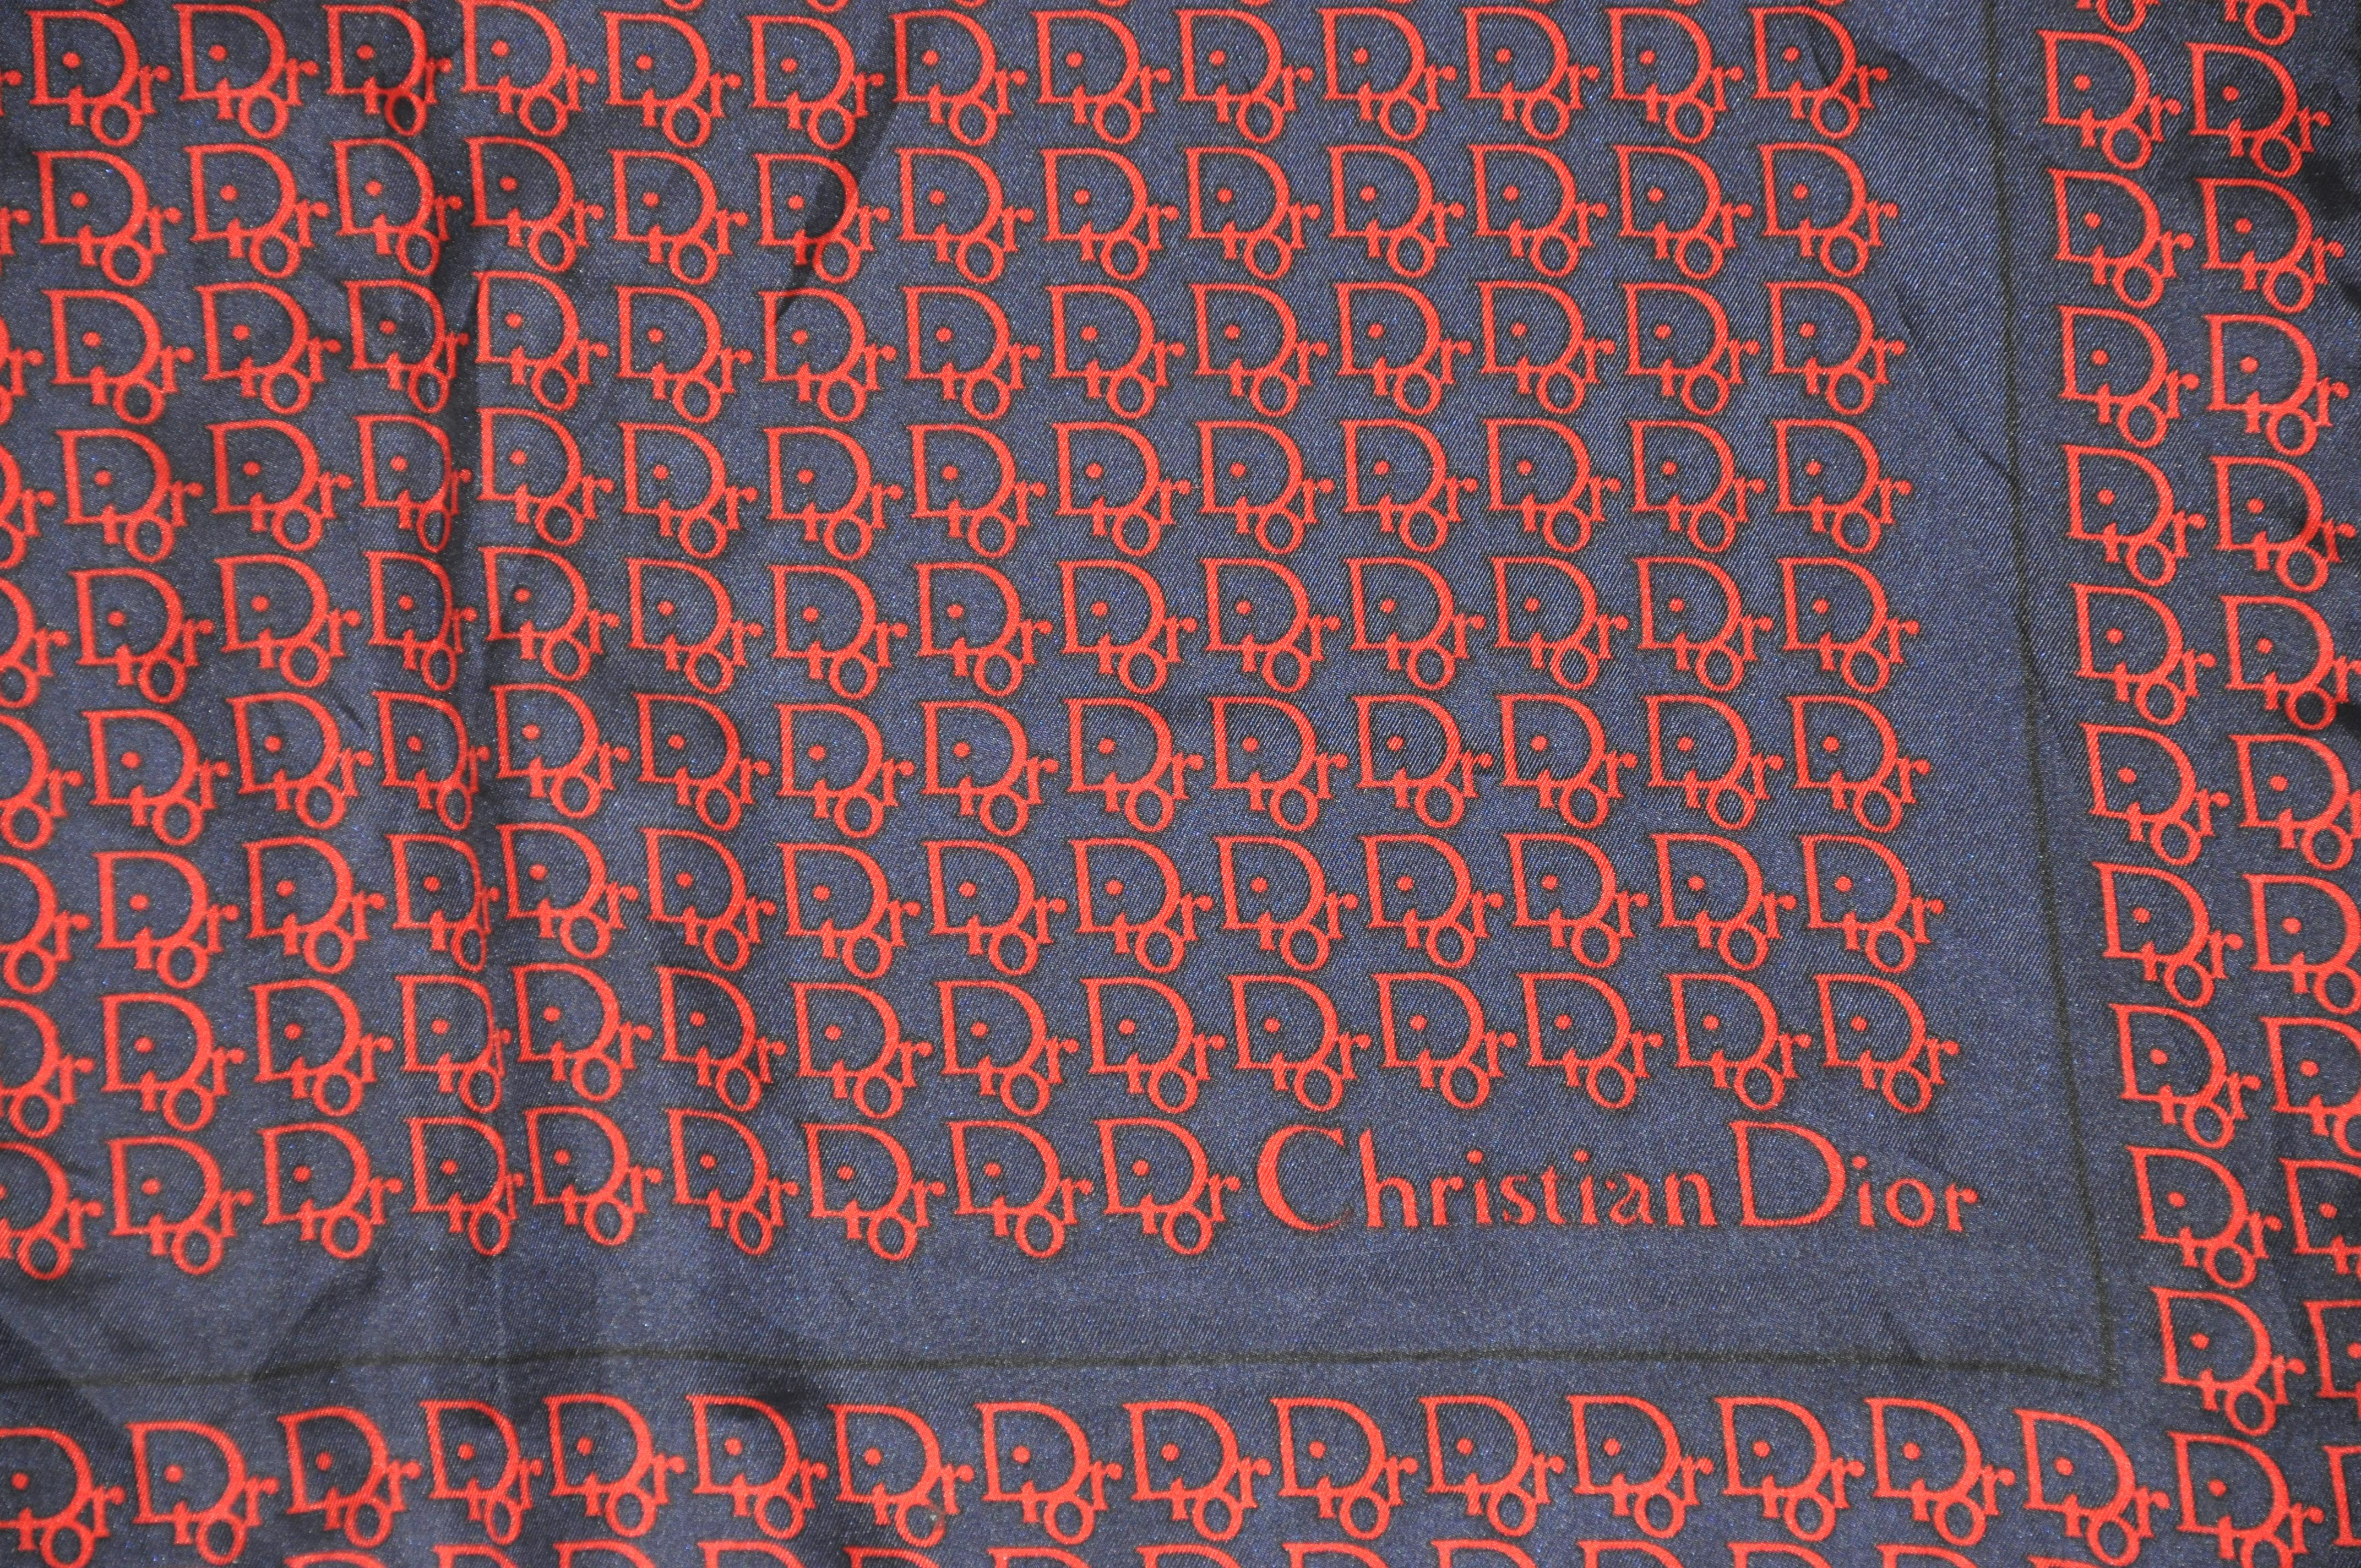        Christian Dior's signature monogram silk scarf in Midnight blue and red accented with hand-rolled edges and measures 19 inches by 19 inches. Made in Italy.